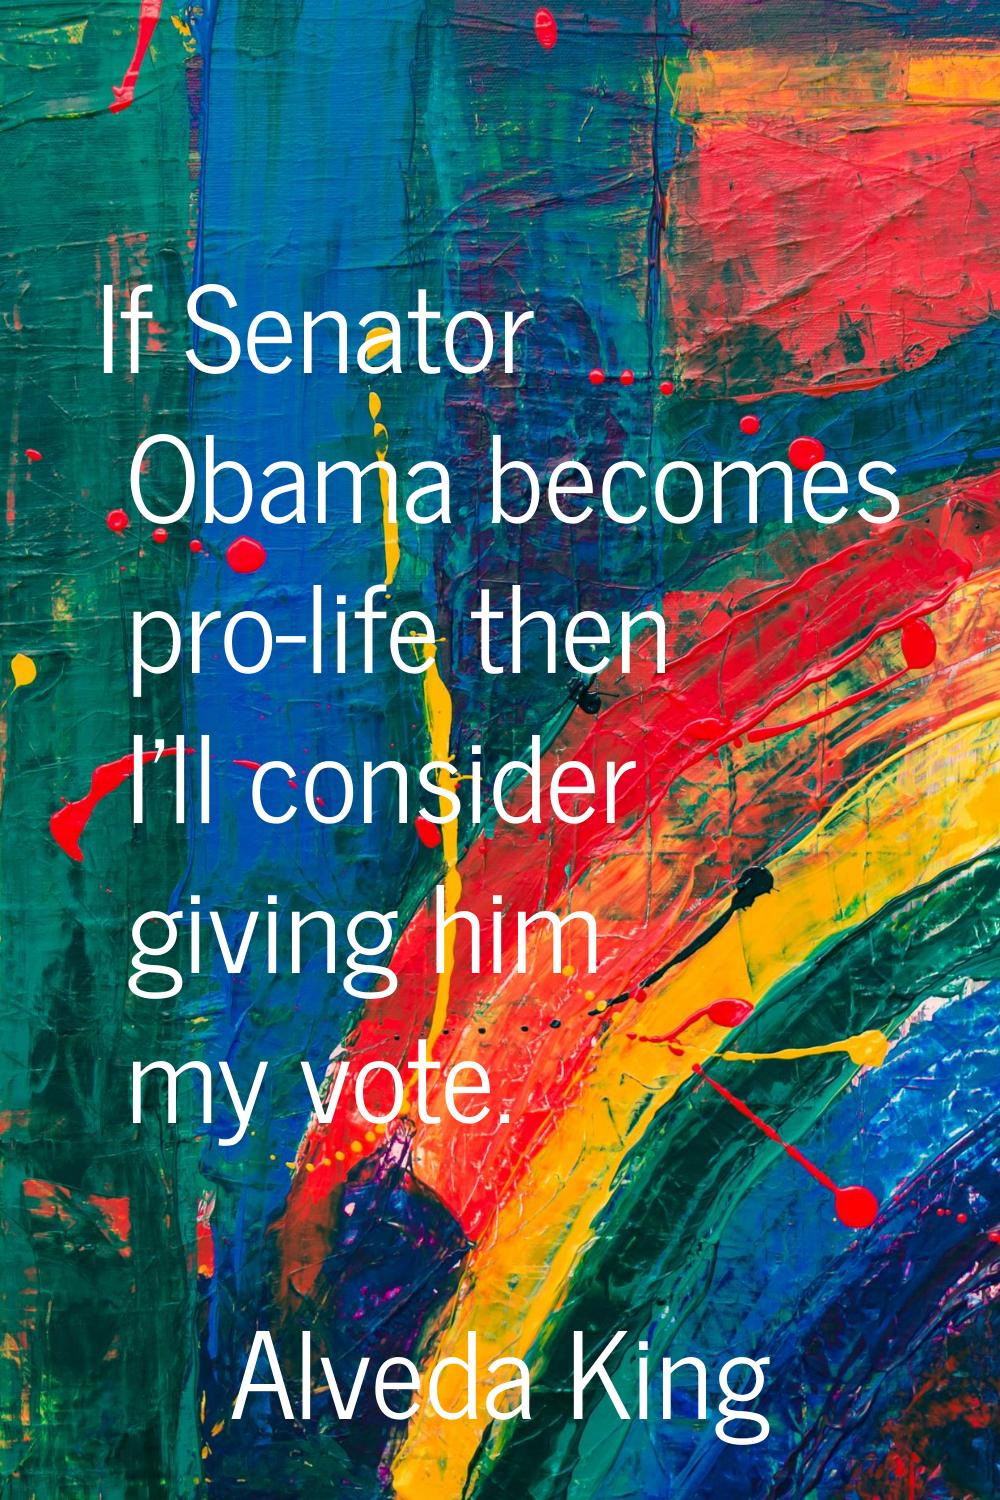 If Senator Obama becomes pro-life then I'll consider giving him my vote.